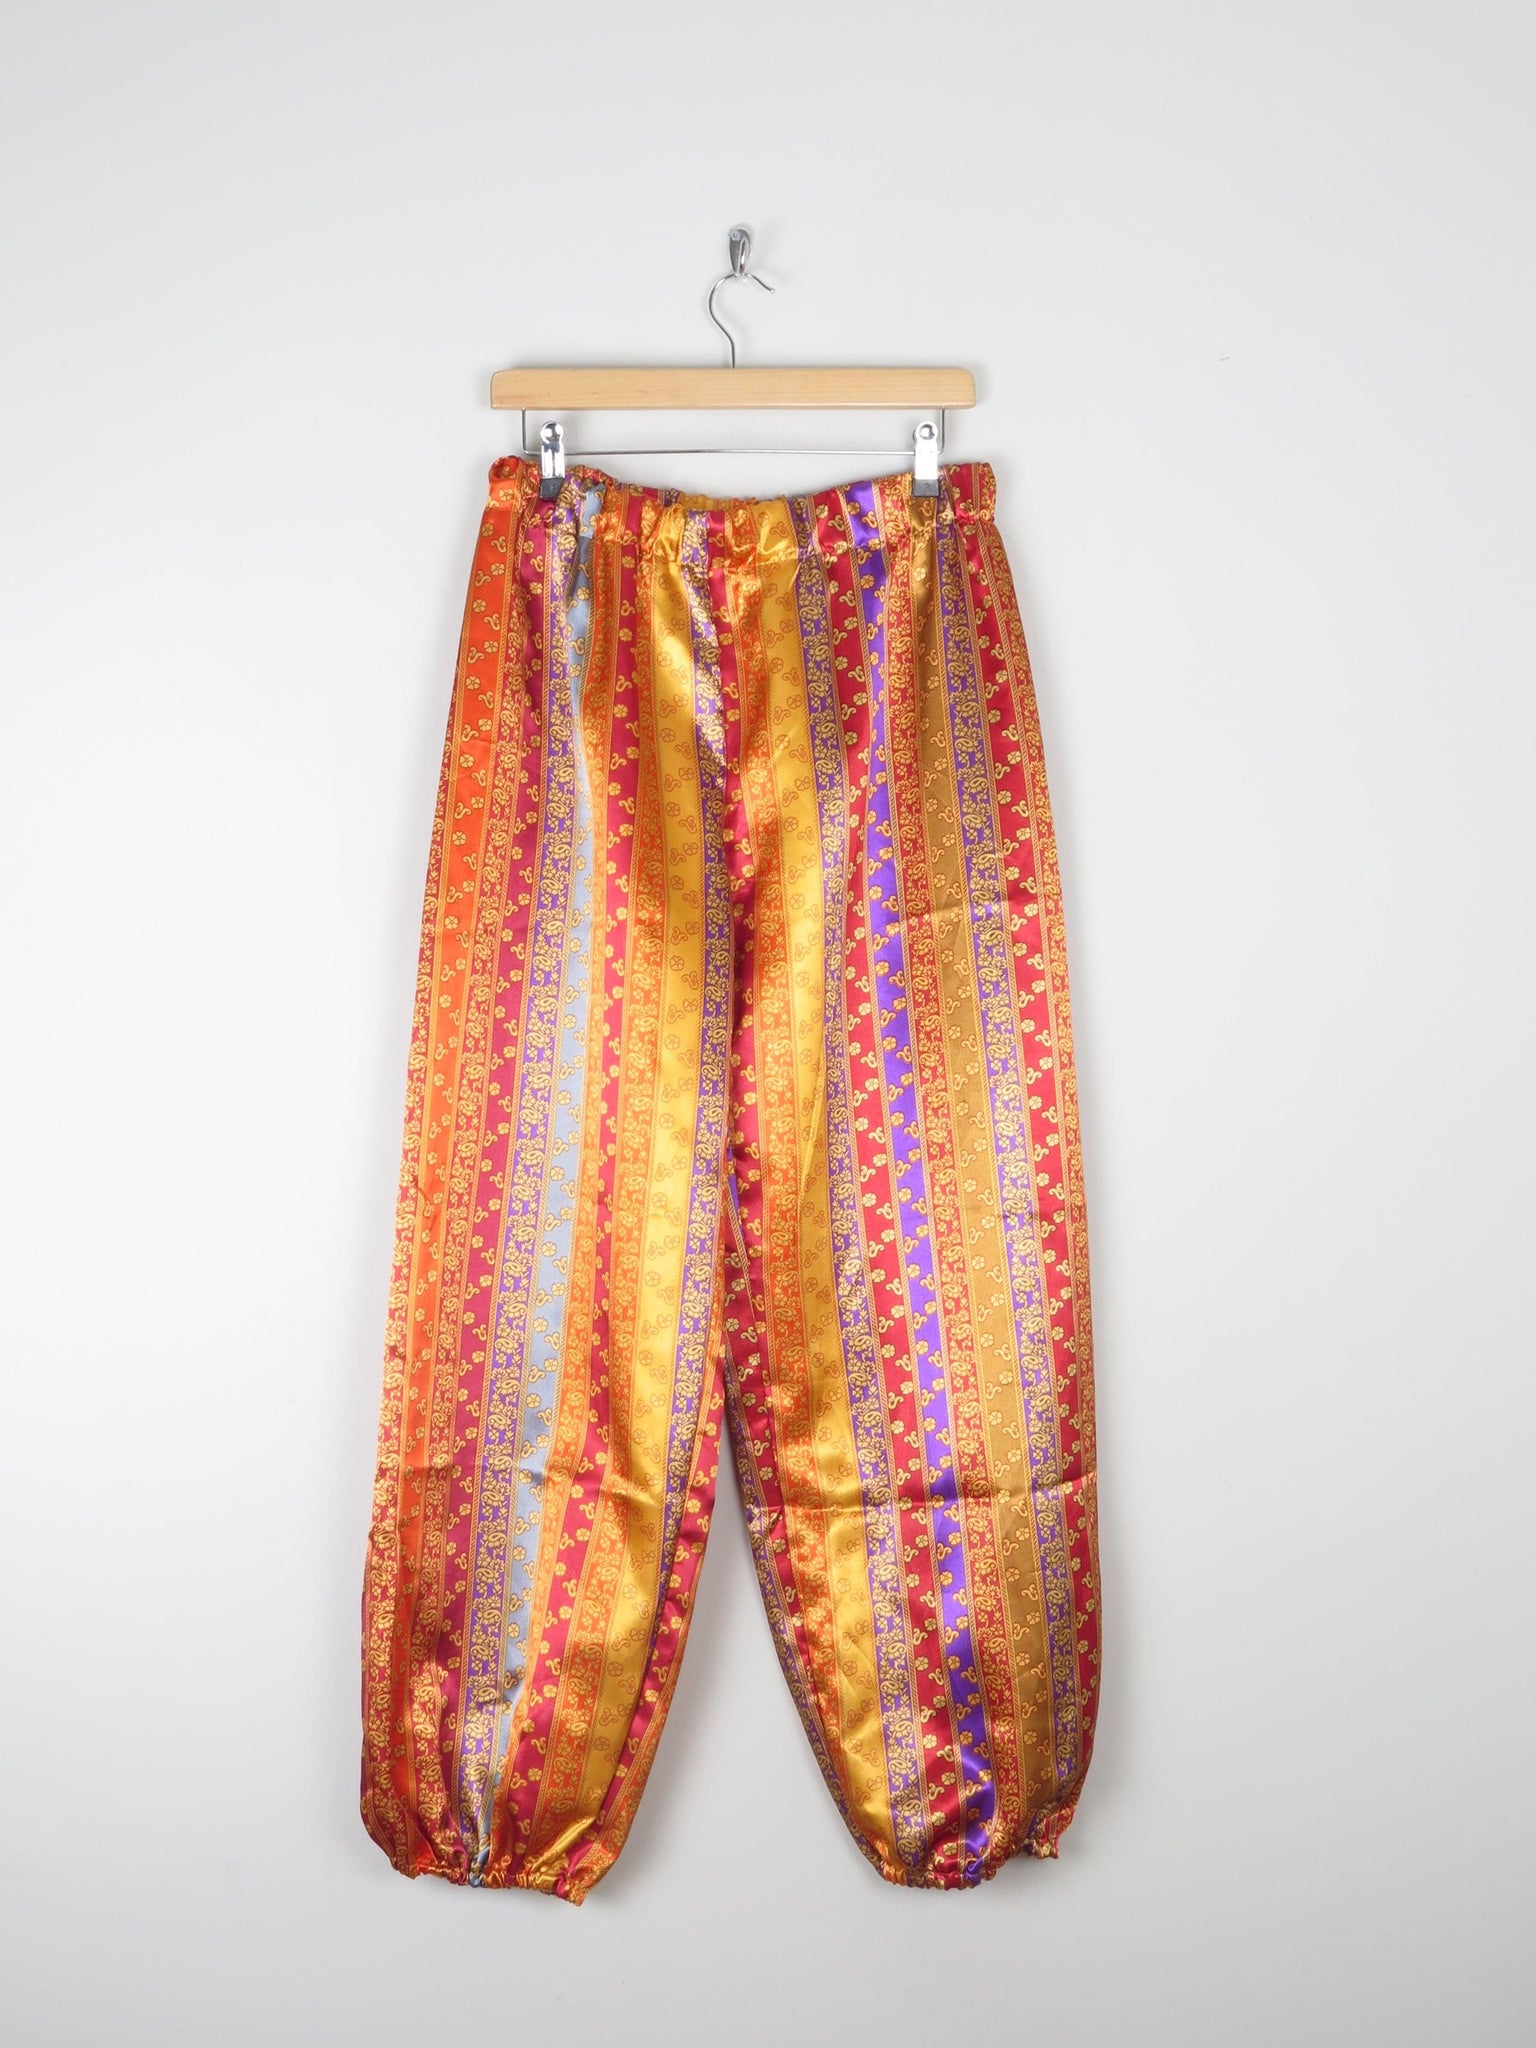 Women's Harem Genie Style Satin Printed Trousers M - The Harlequin